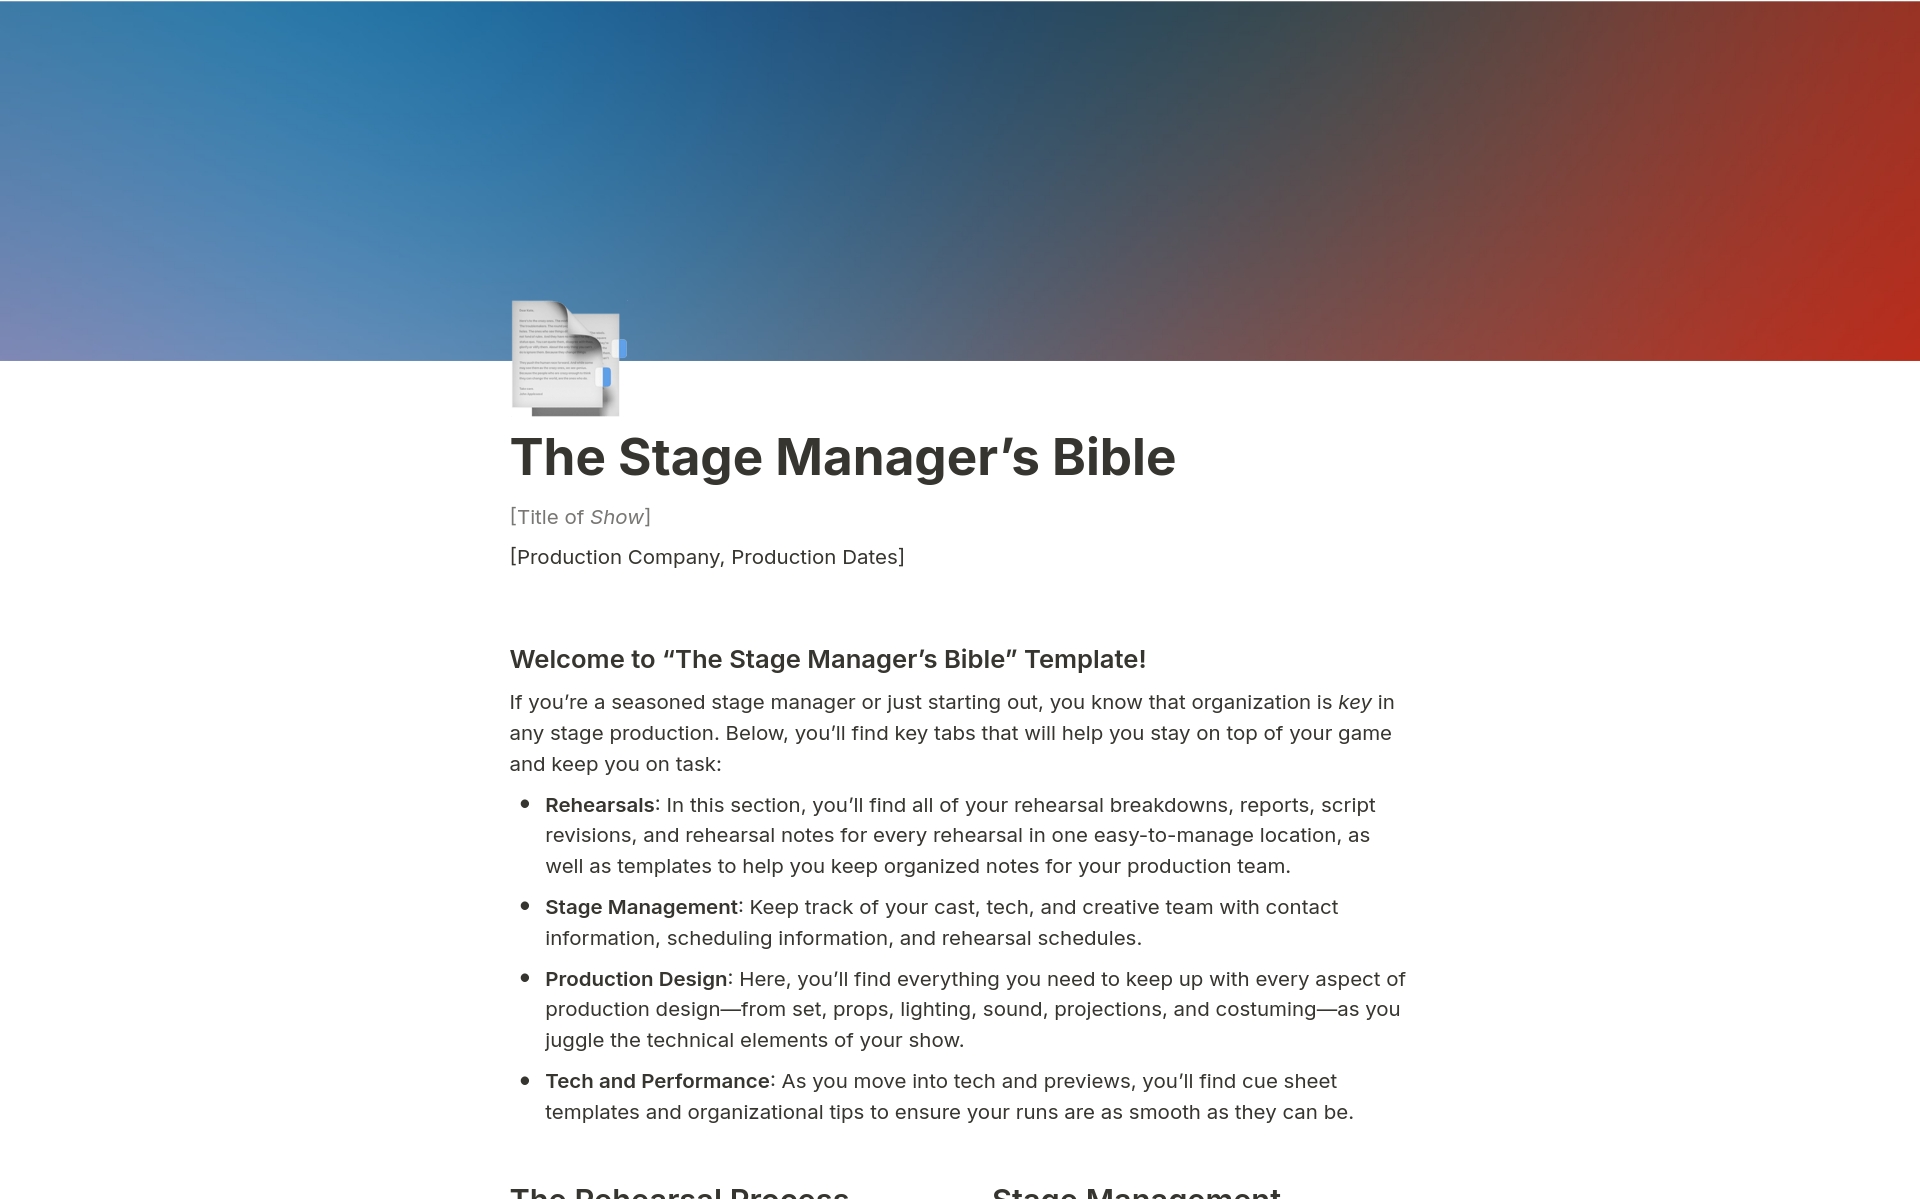 Mallin esikatselu nimelle The Stage Manager's Bible